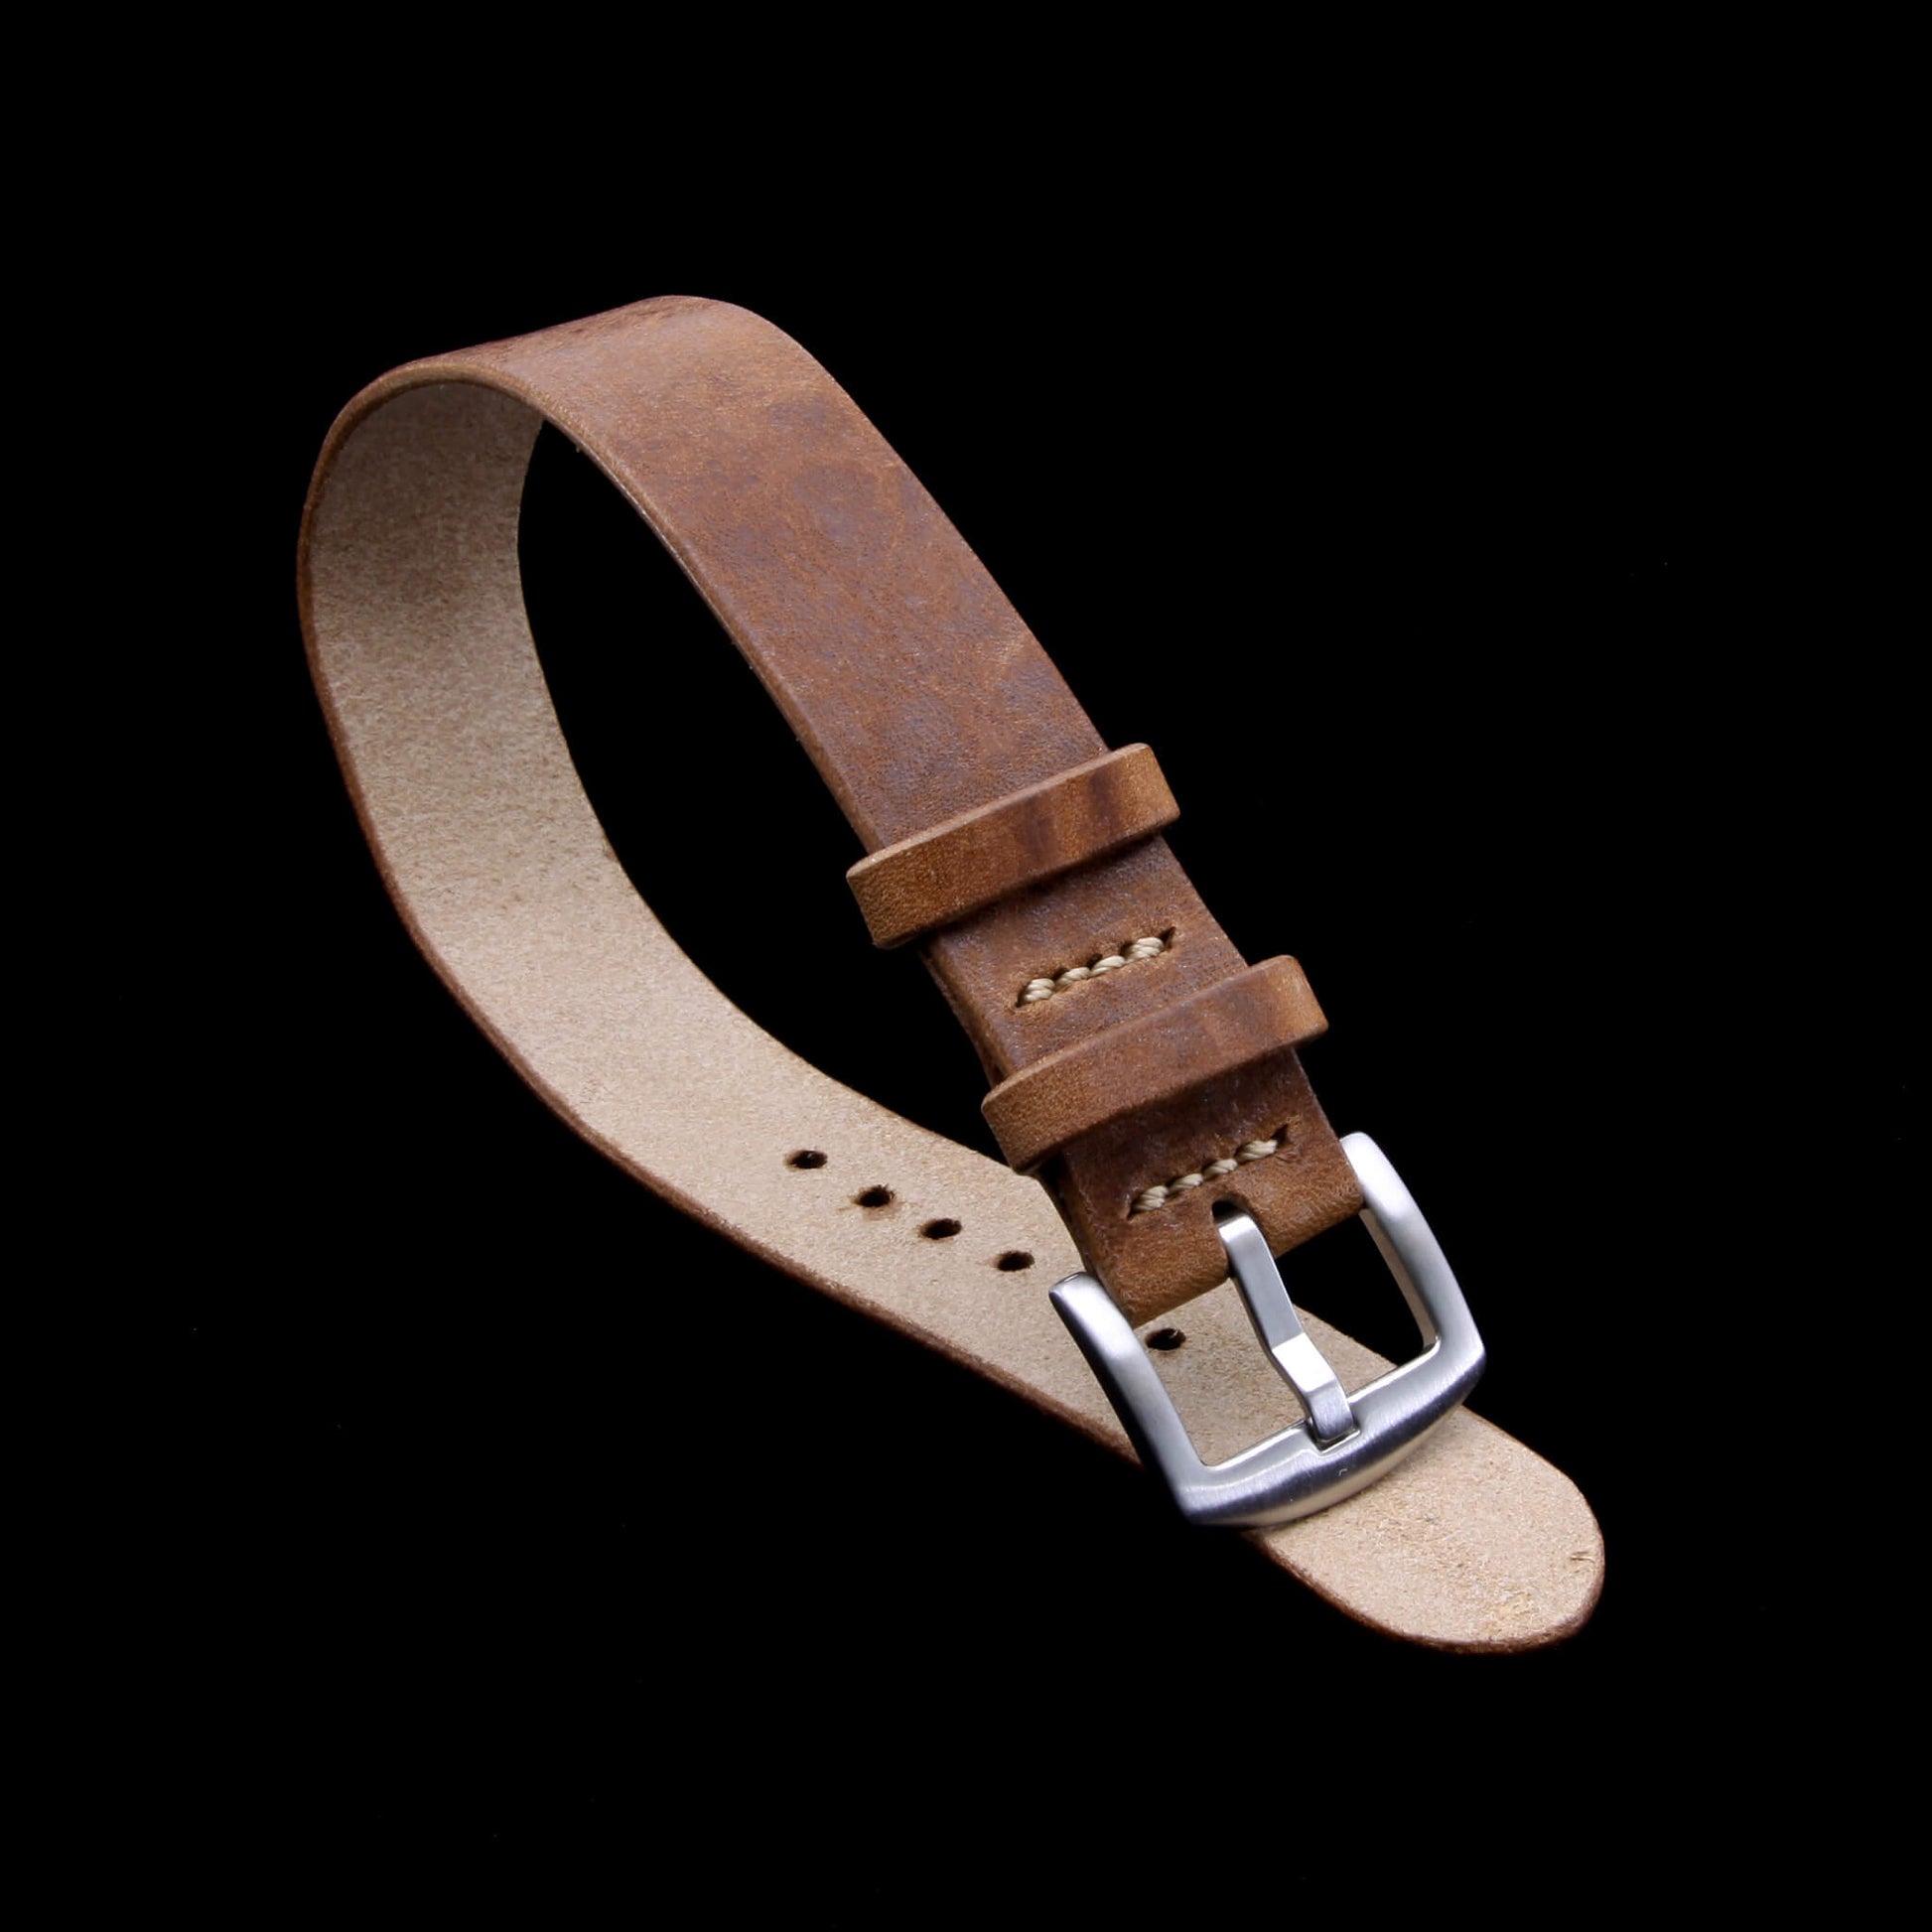 Single Pass Leather Watch Strap, 2-Keeper Style Vintage 402 | Full Grain Italian Vegetable-Tanned Leather | Cozy Handmade